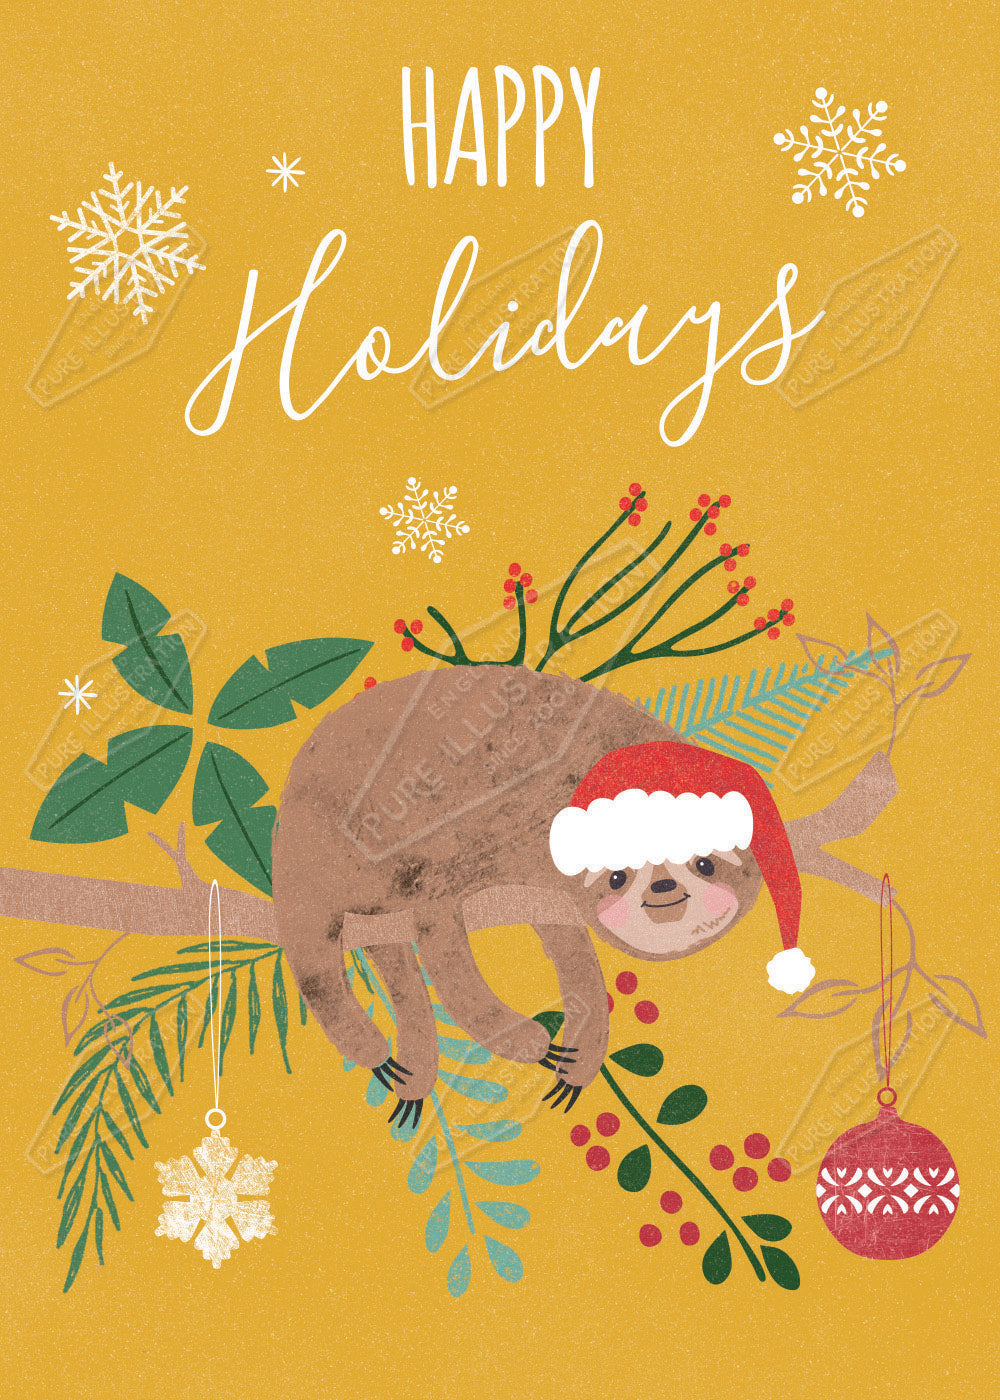 Sloth Christmas design by Gill Eggleston for Pure Art Licensing Agency